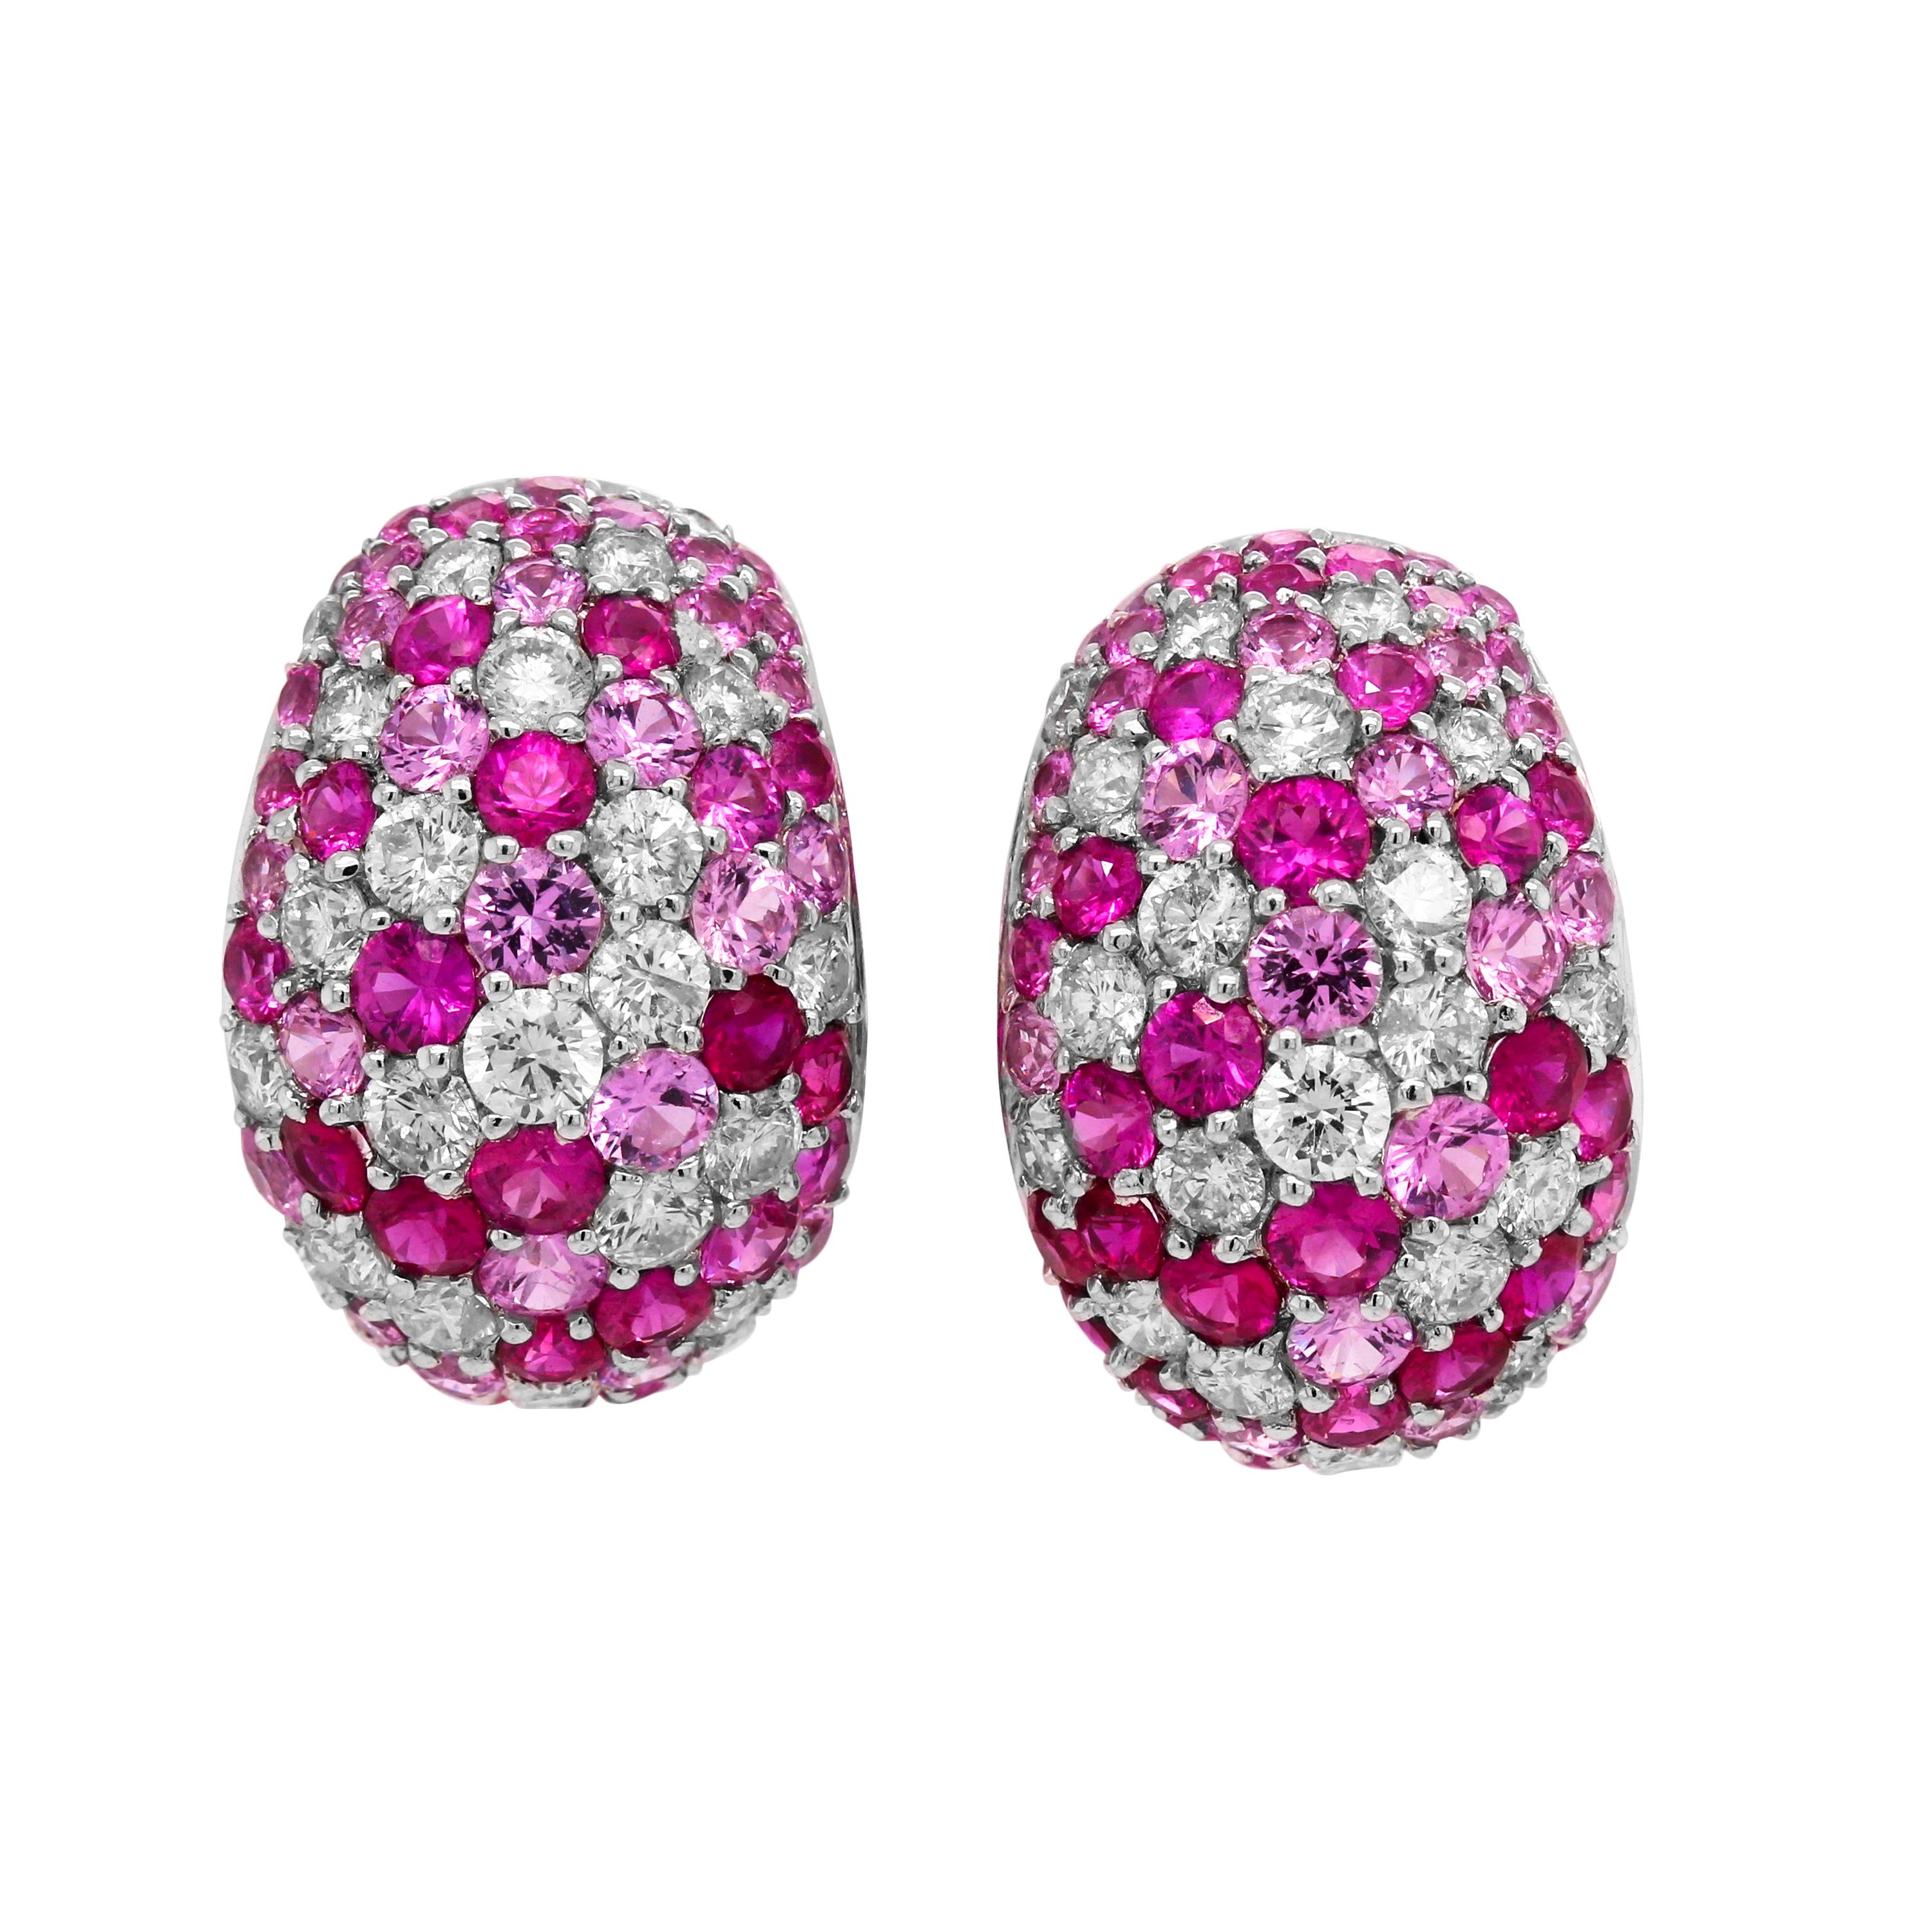 Round Cut Shaded Pink Sapphires Diamonds 18 Karat White Gold Earrings For Sale